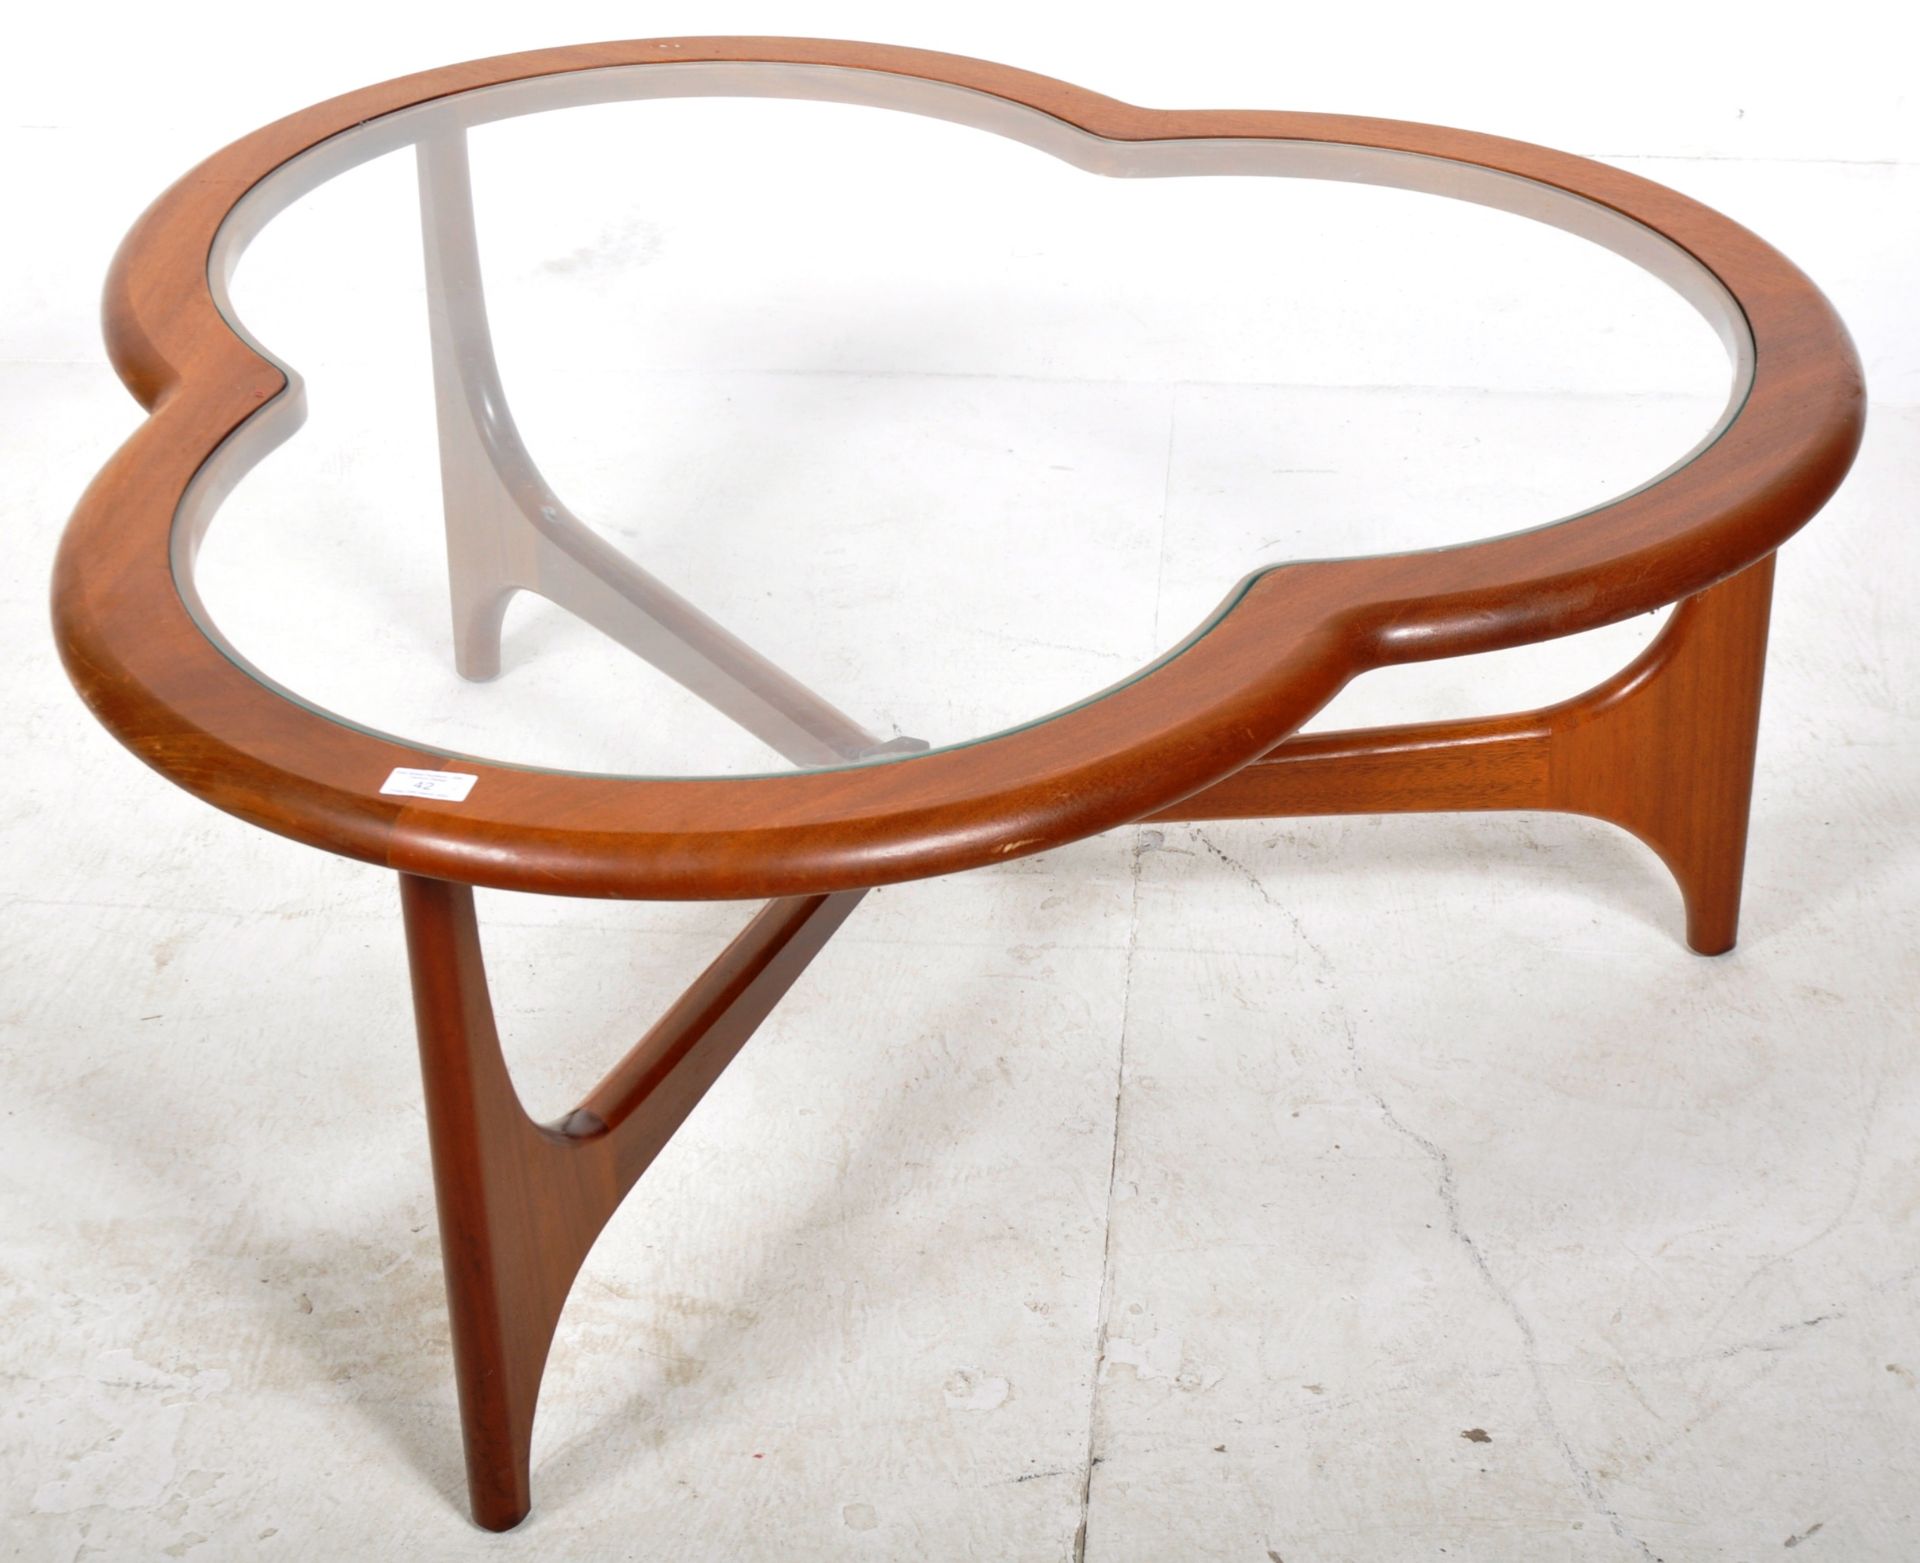 1960'S TEAK WOOD CLOVER SHAPED GLASS INSET COFFEE TABLE - Image 2 of 5